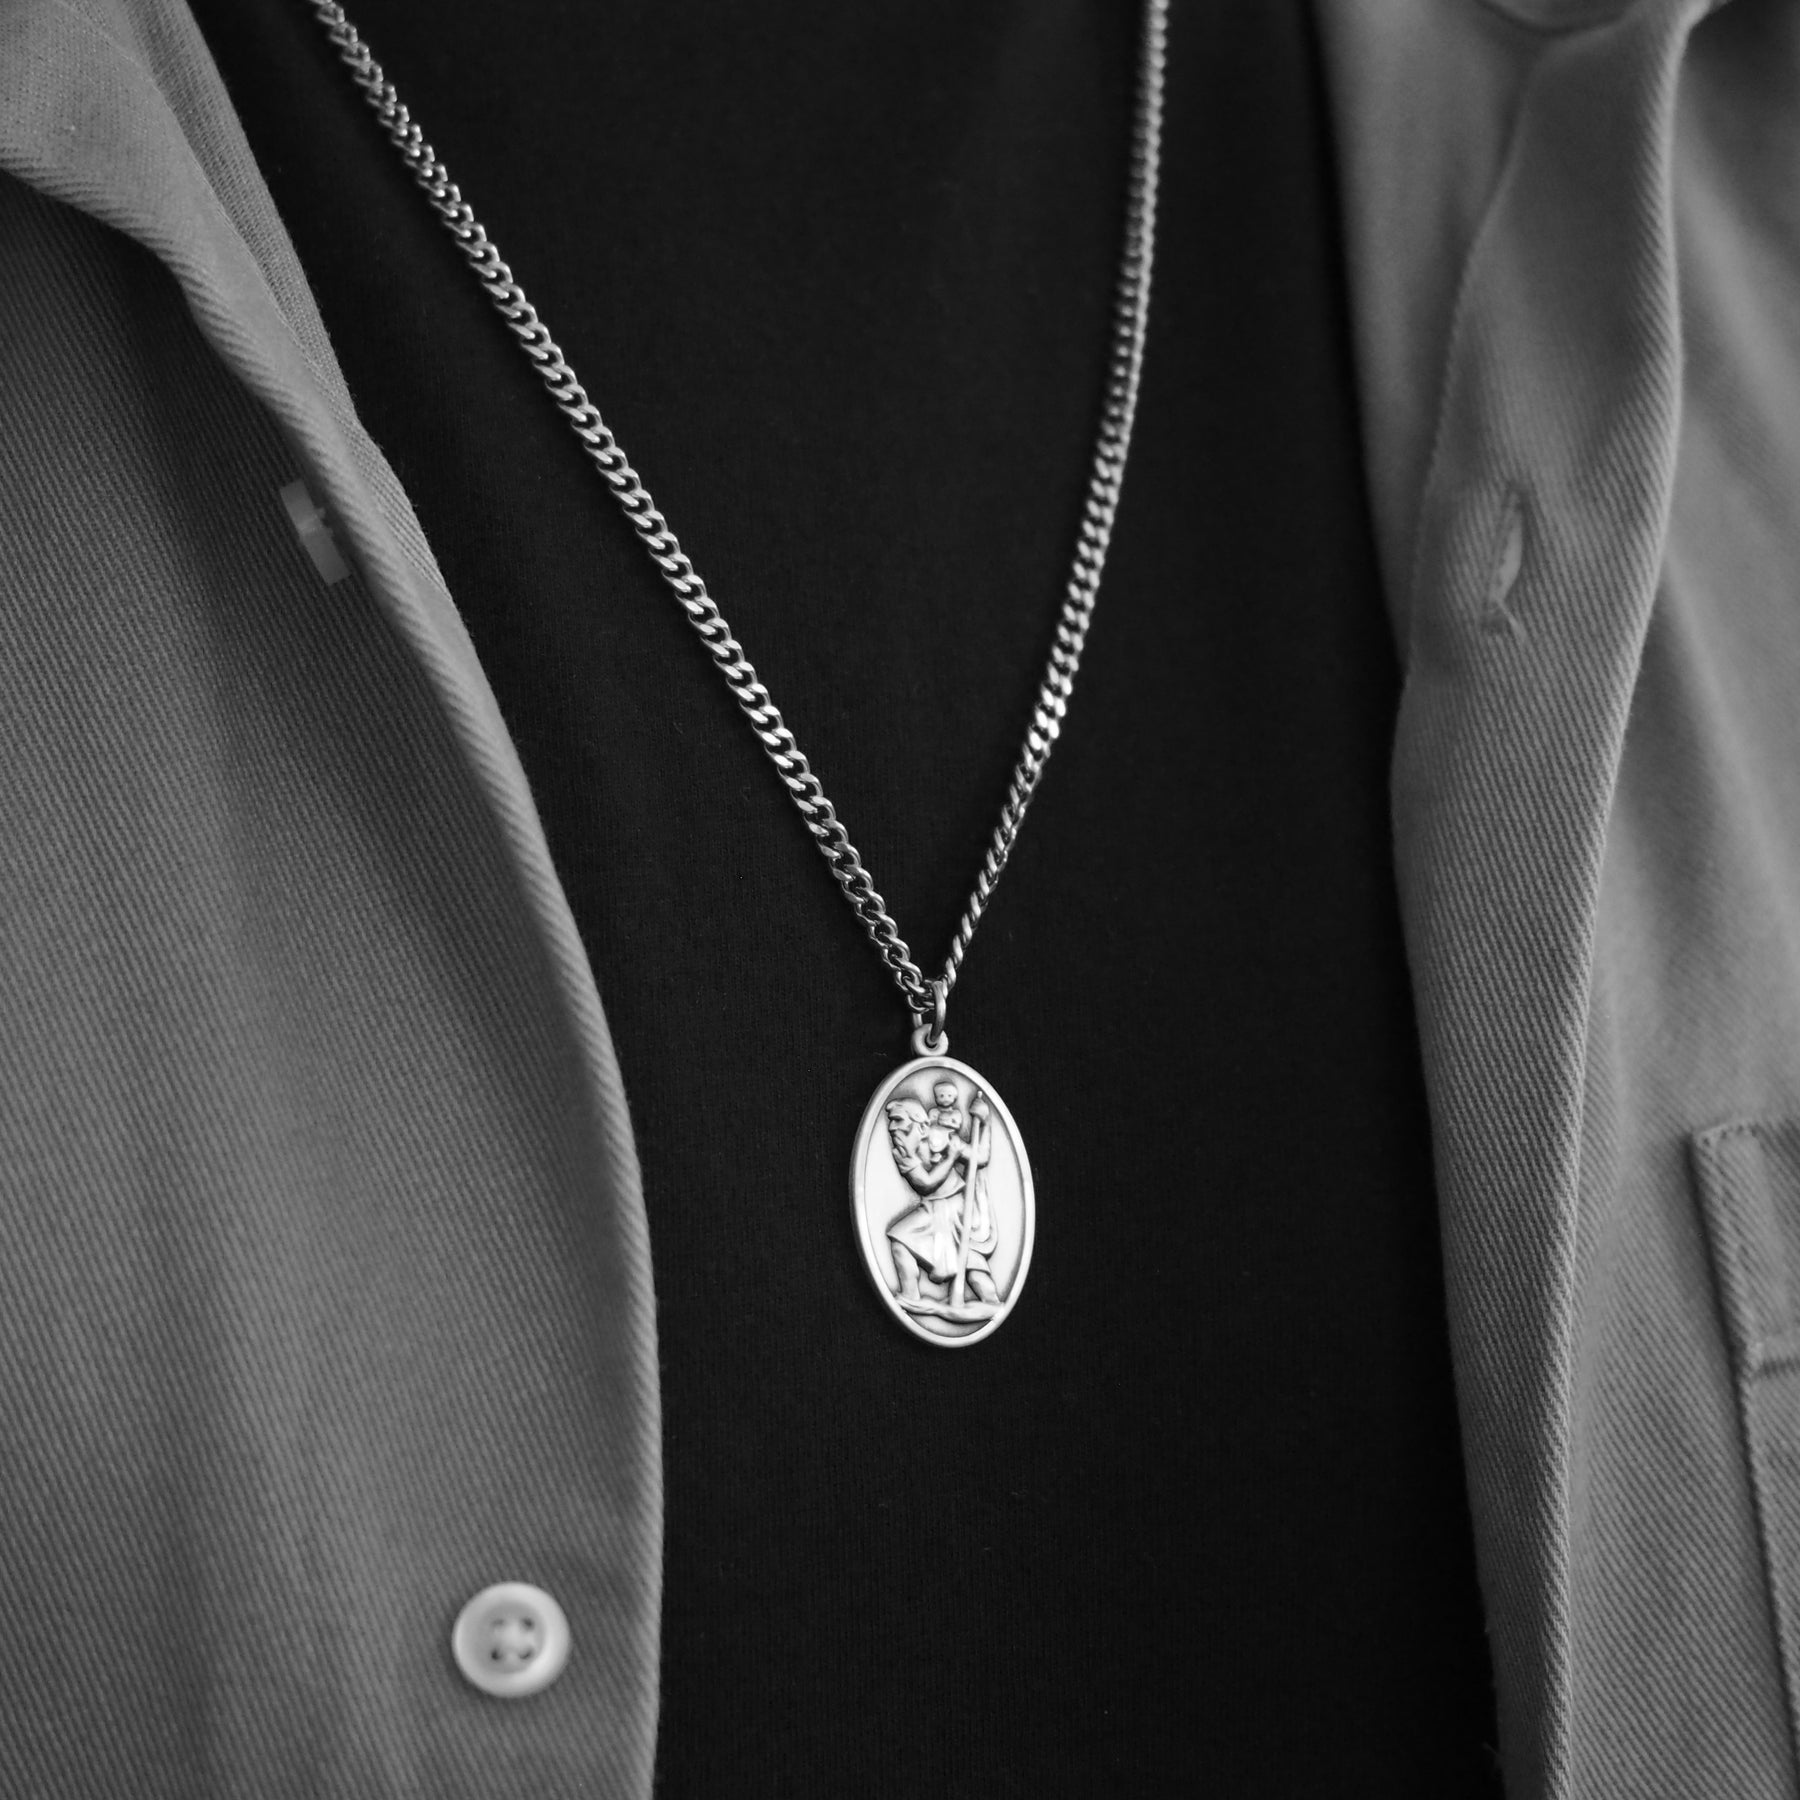 Personalised Large Silver Steel St Christopher Necklace, Travel Gift For Men  | eBay